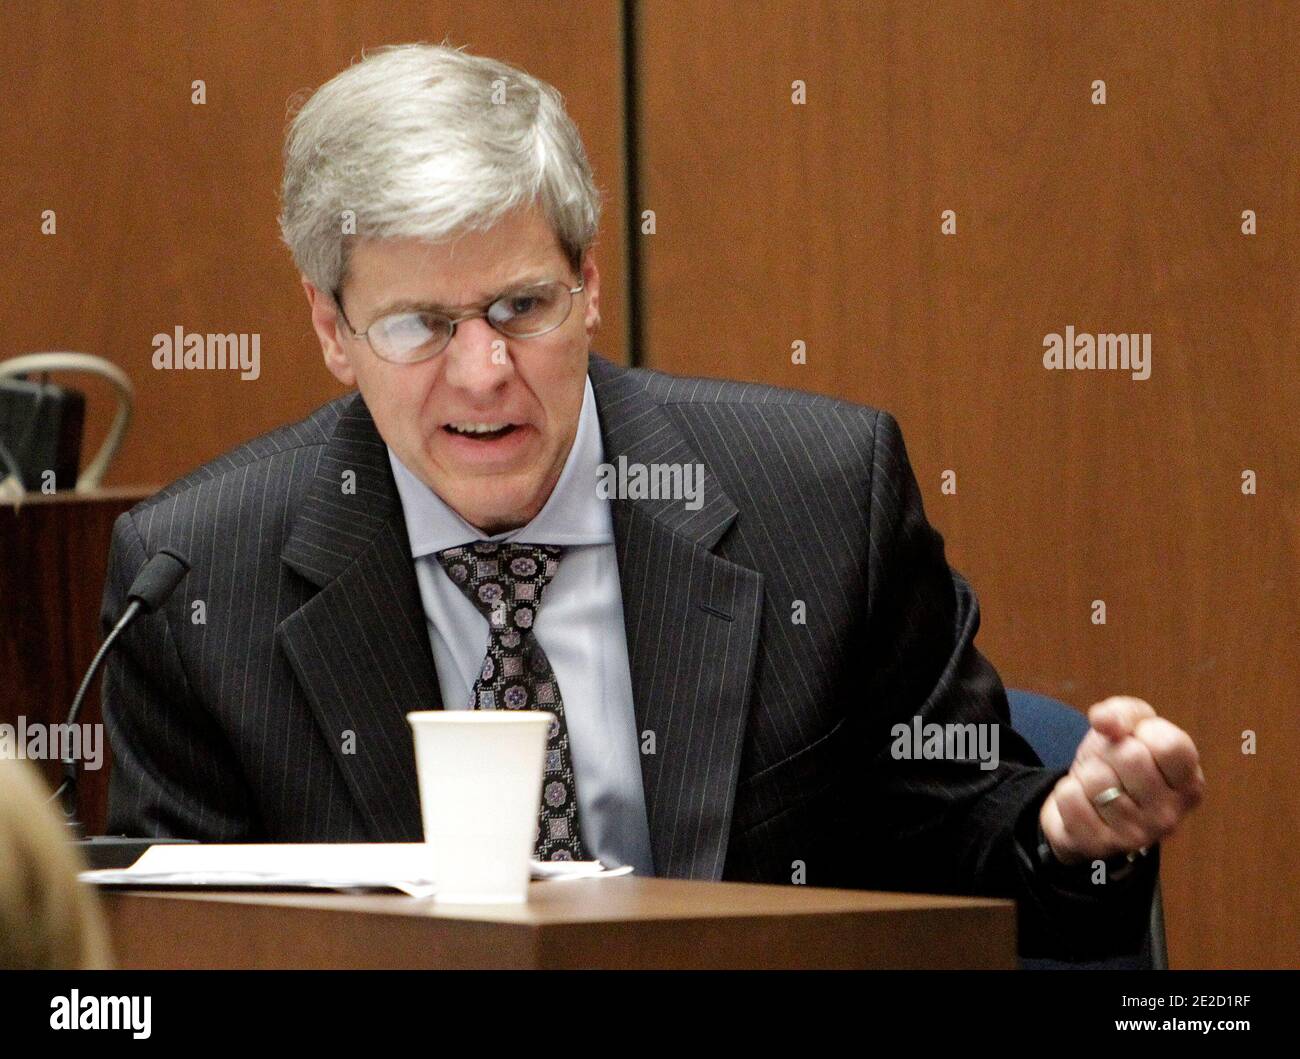 Anesthesiology expert Dr. Steven Shafer testifies during Dr. Conrad Murray's involuntary manslaughter trial in downtown Los Angeles on October 19, 2011. Murray has pleaded not guilty and faces four years in prison and the loss of his medical license if convicted of involuntary manslaughter in Michael Jackson's death. Photo by Reed Saxon/Pool/ABACAPRESS.COM Stock Photo